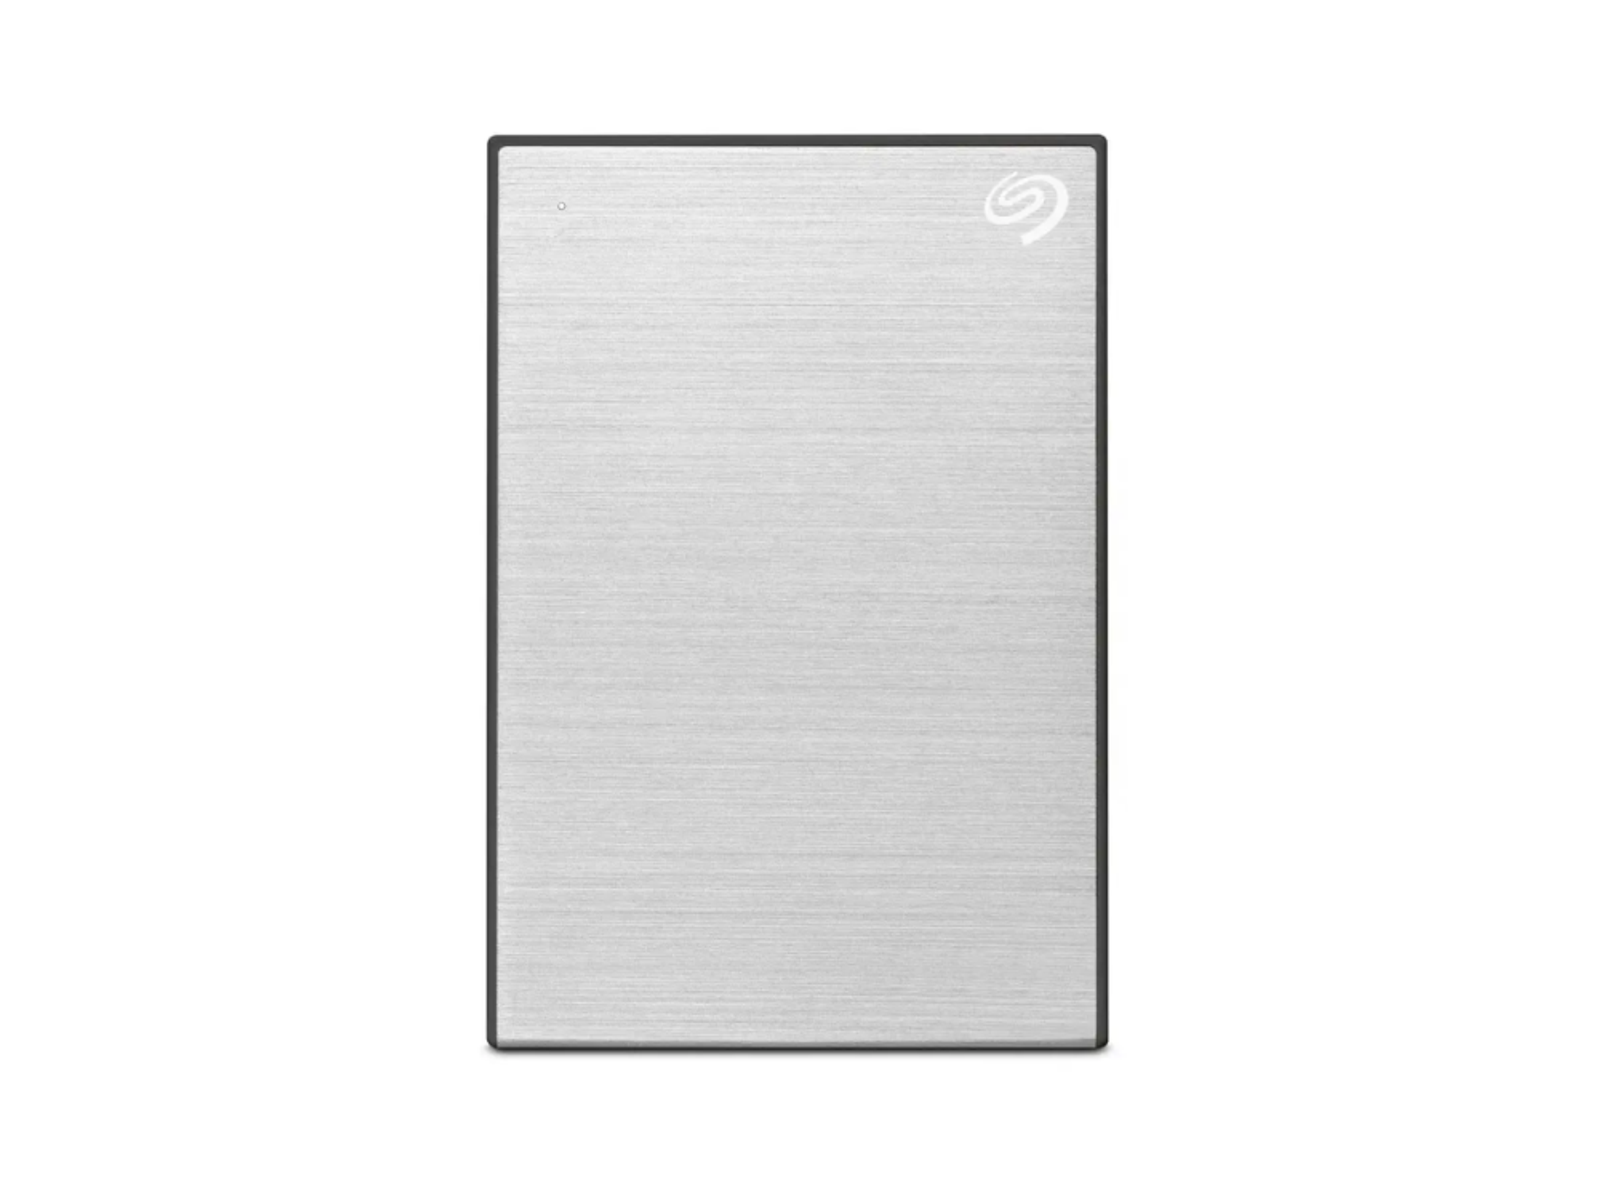 ONETOUCHPORT. SEAGATE Zoll, Silber extern, TB SILBER, 4 STKC4000401 4TB HDD, 2,5